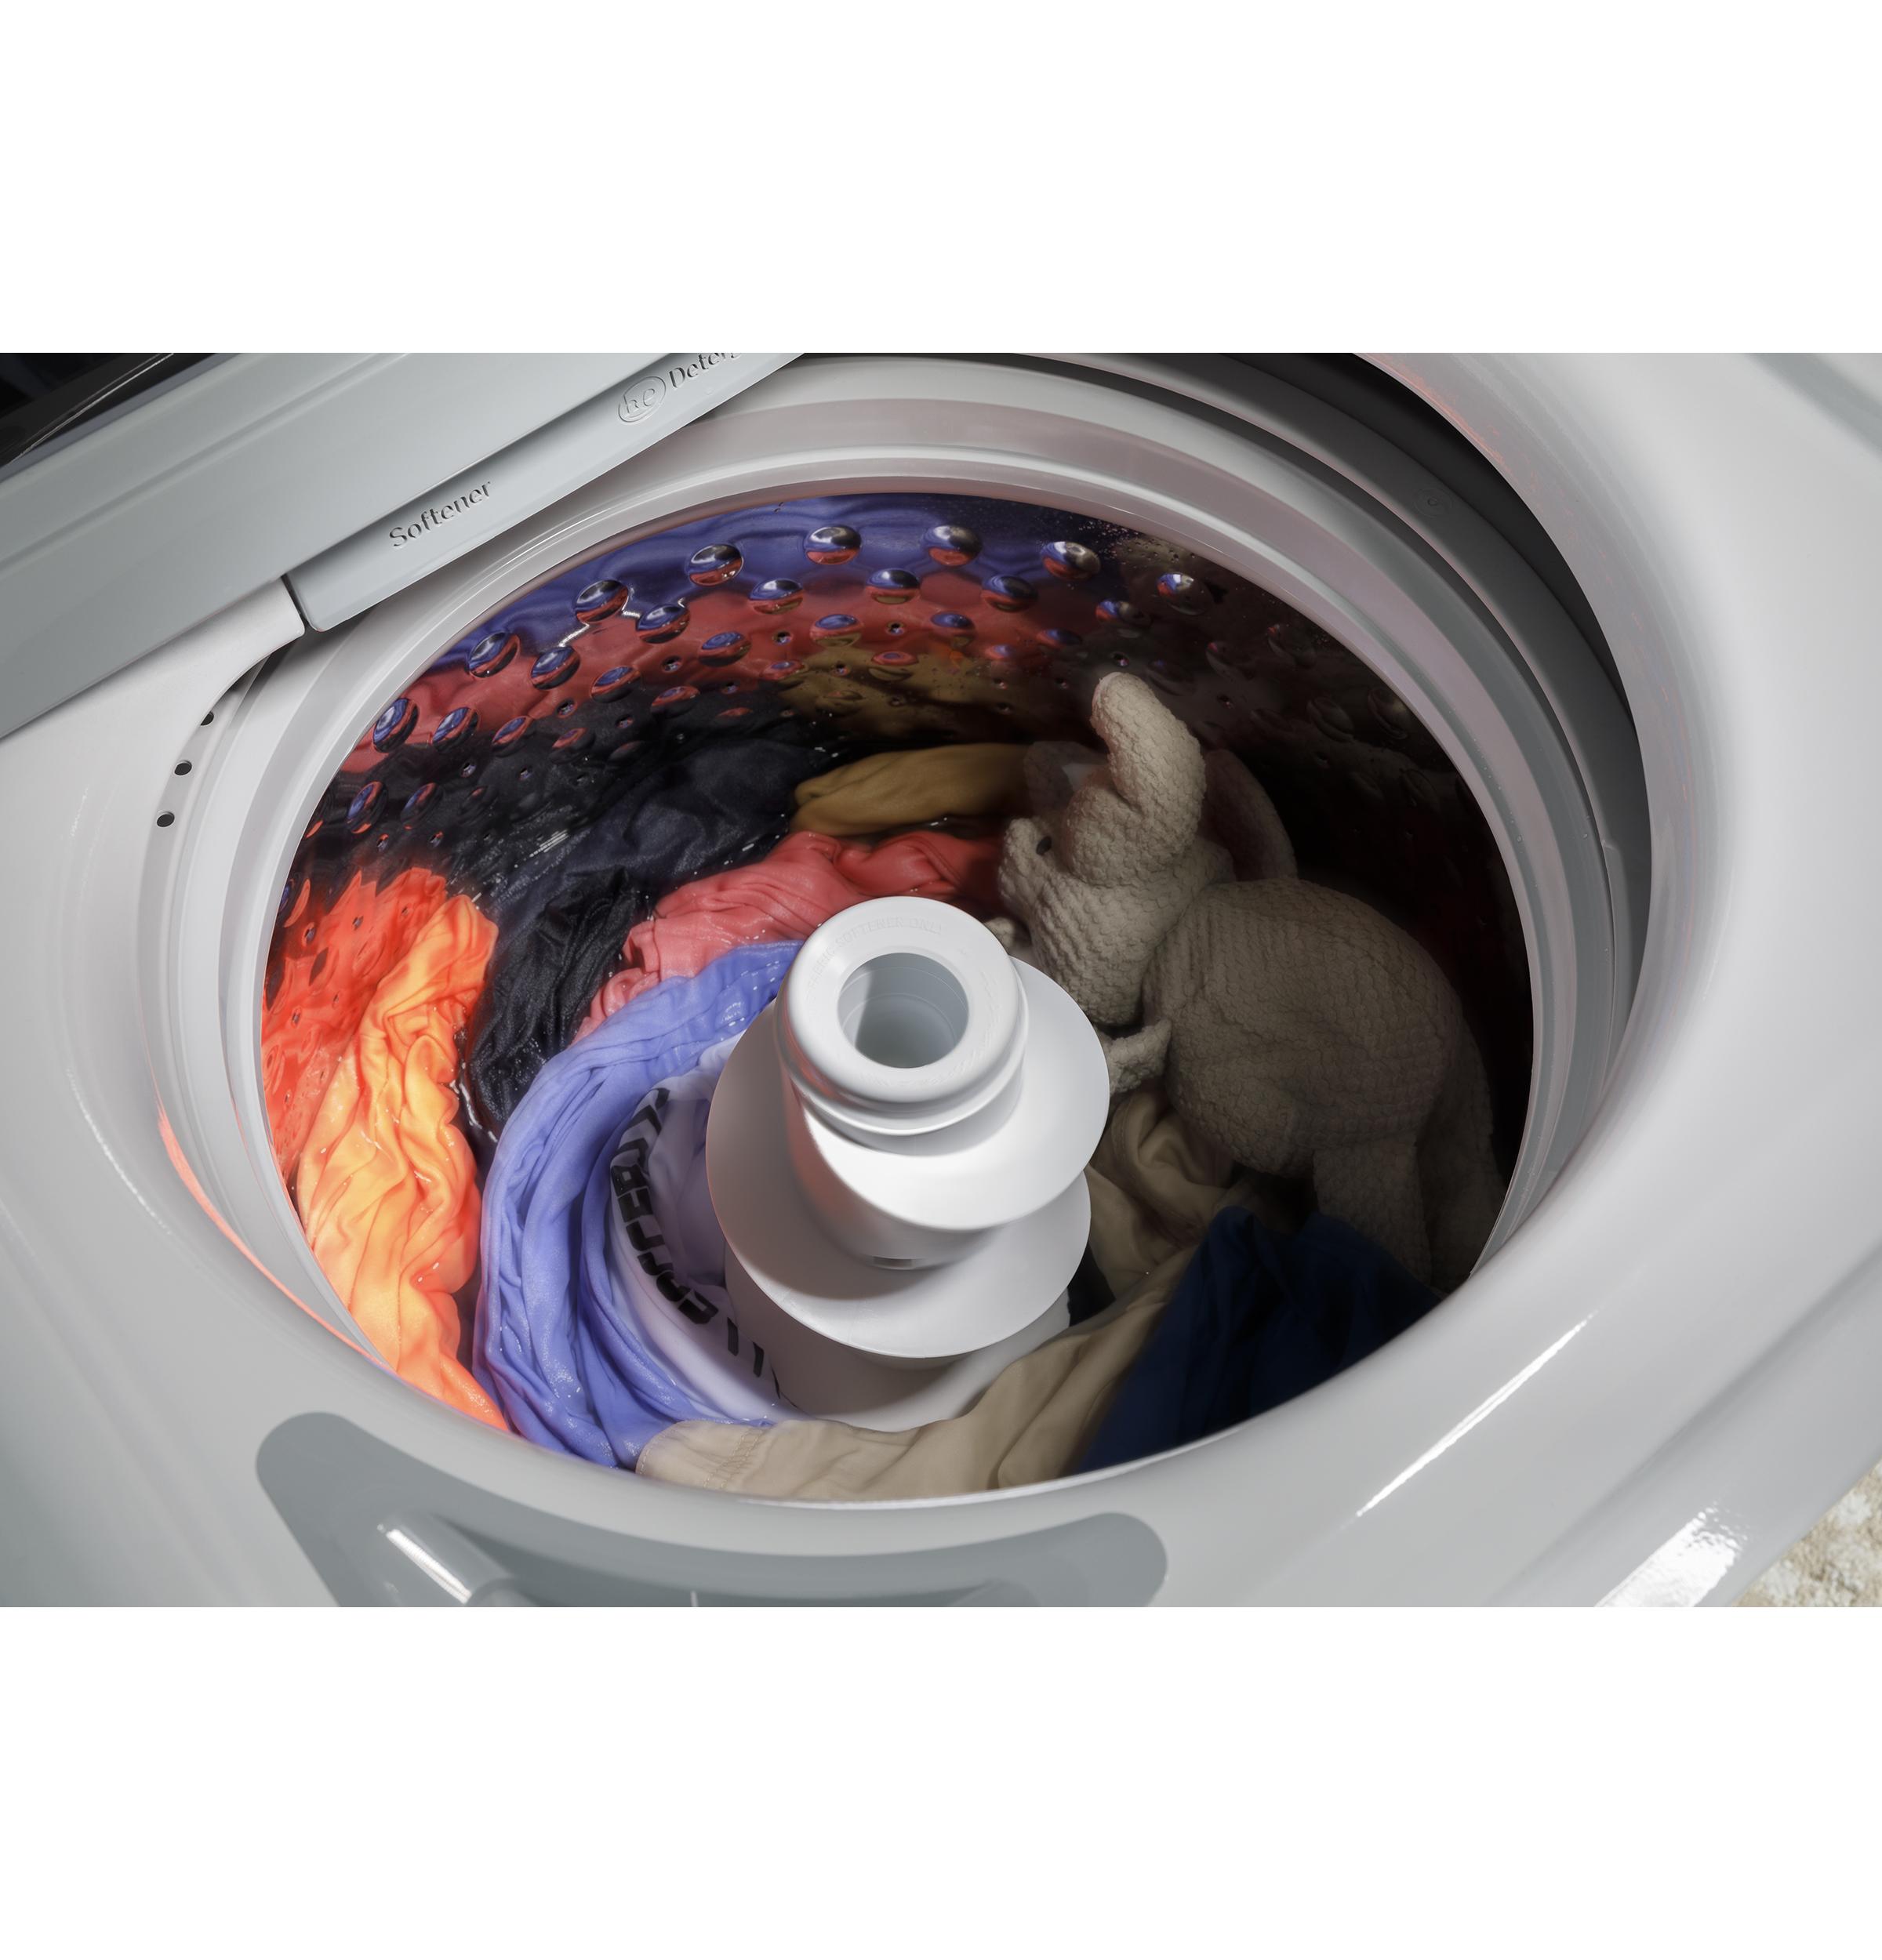 GE® 4.5 cu. ft. Capacity Washer with Water Level Control